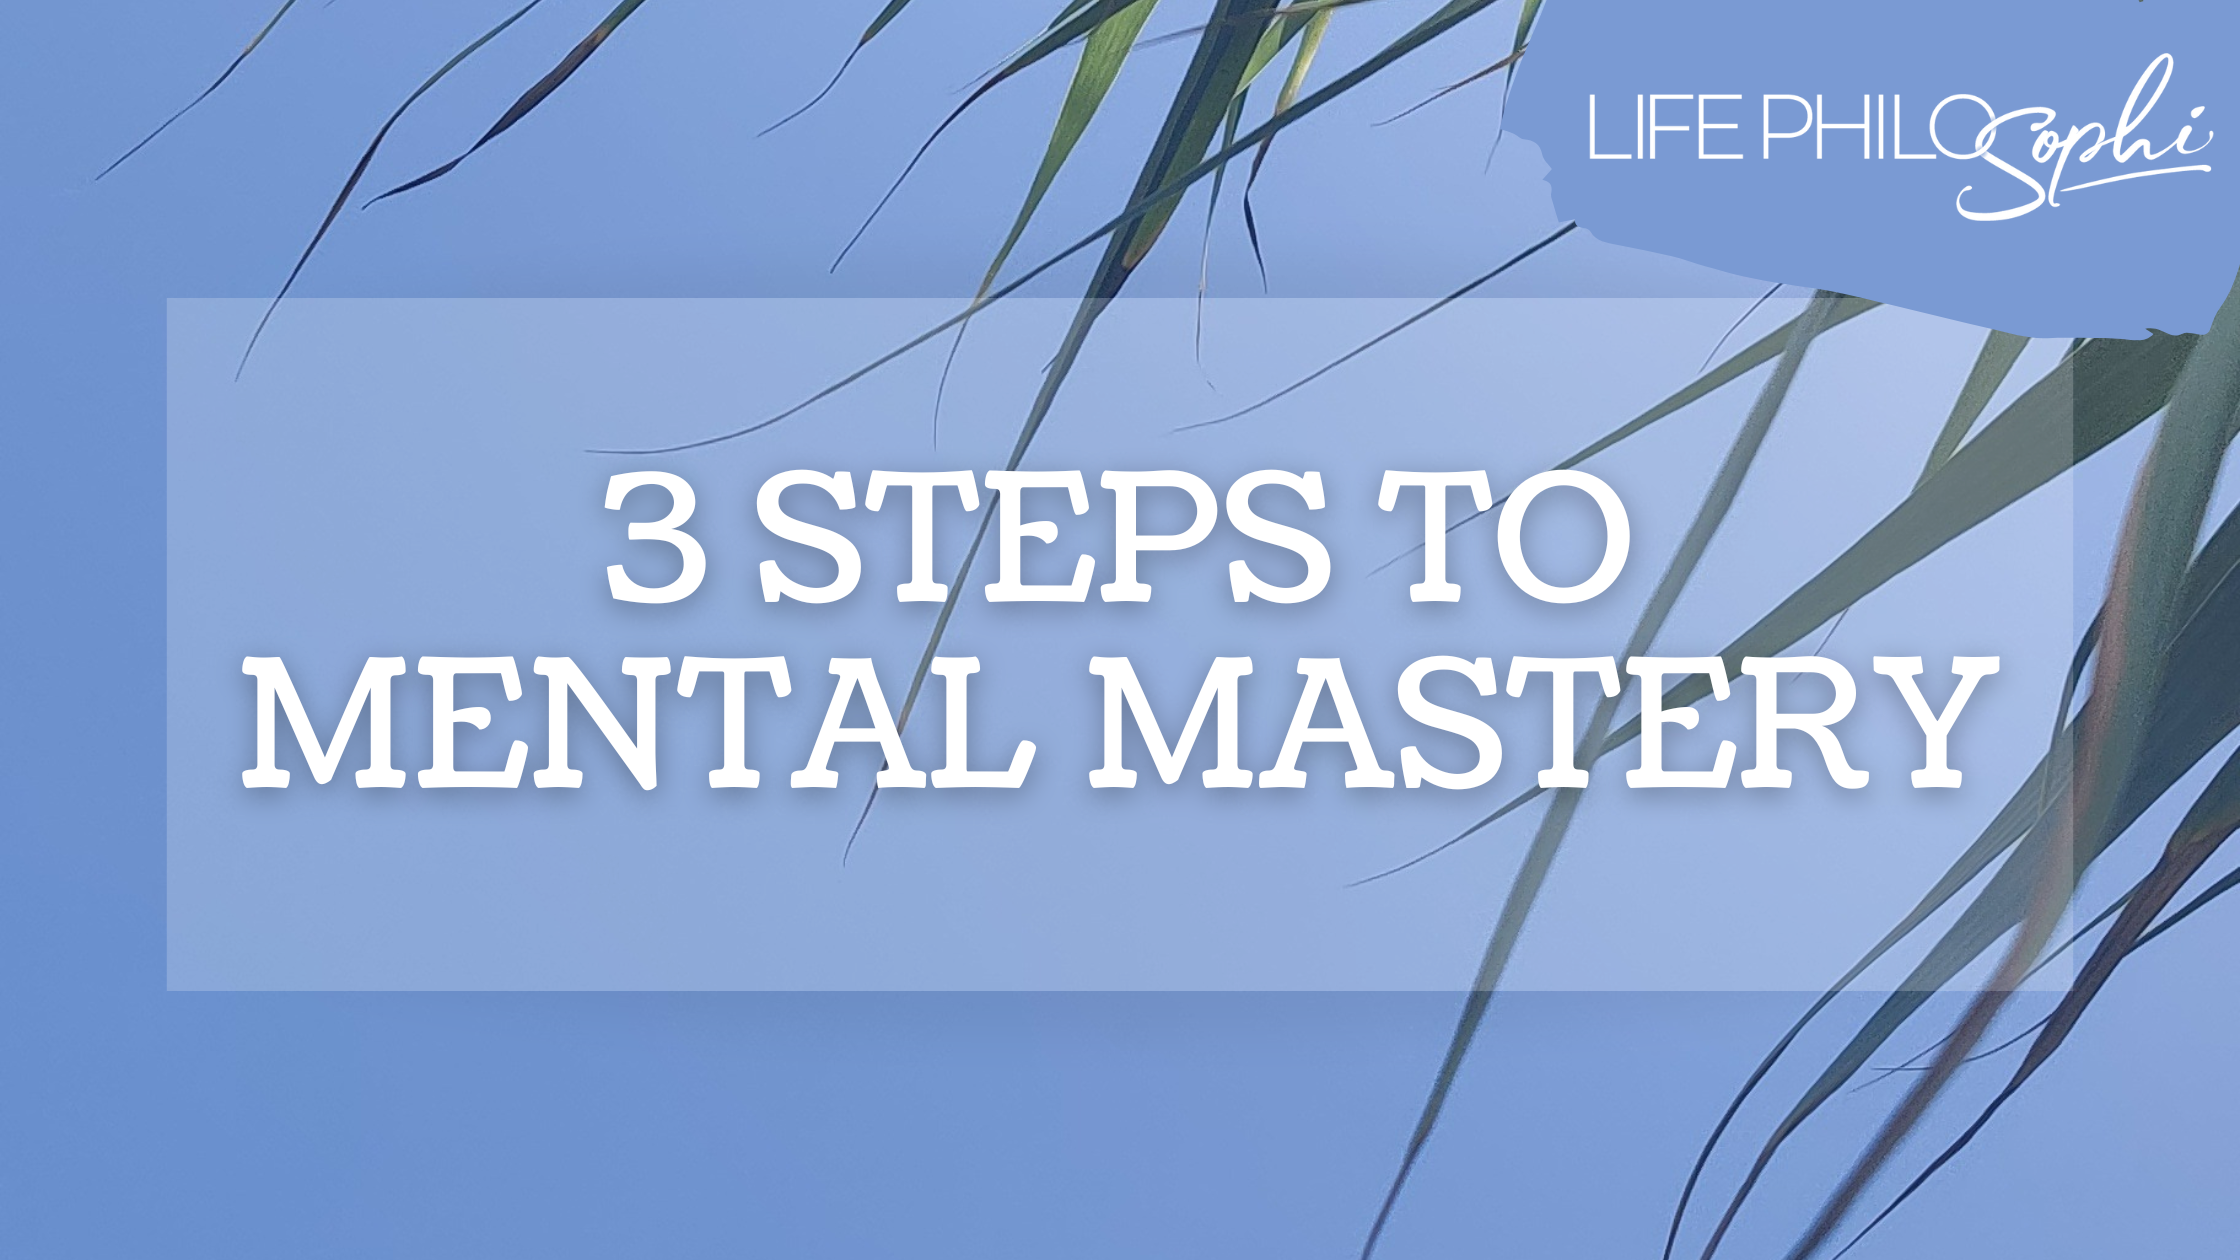 Mental Mastery: How to master your mind